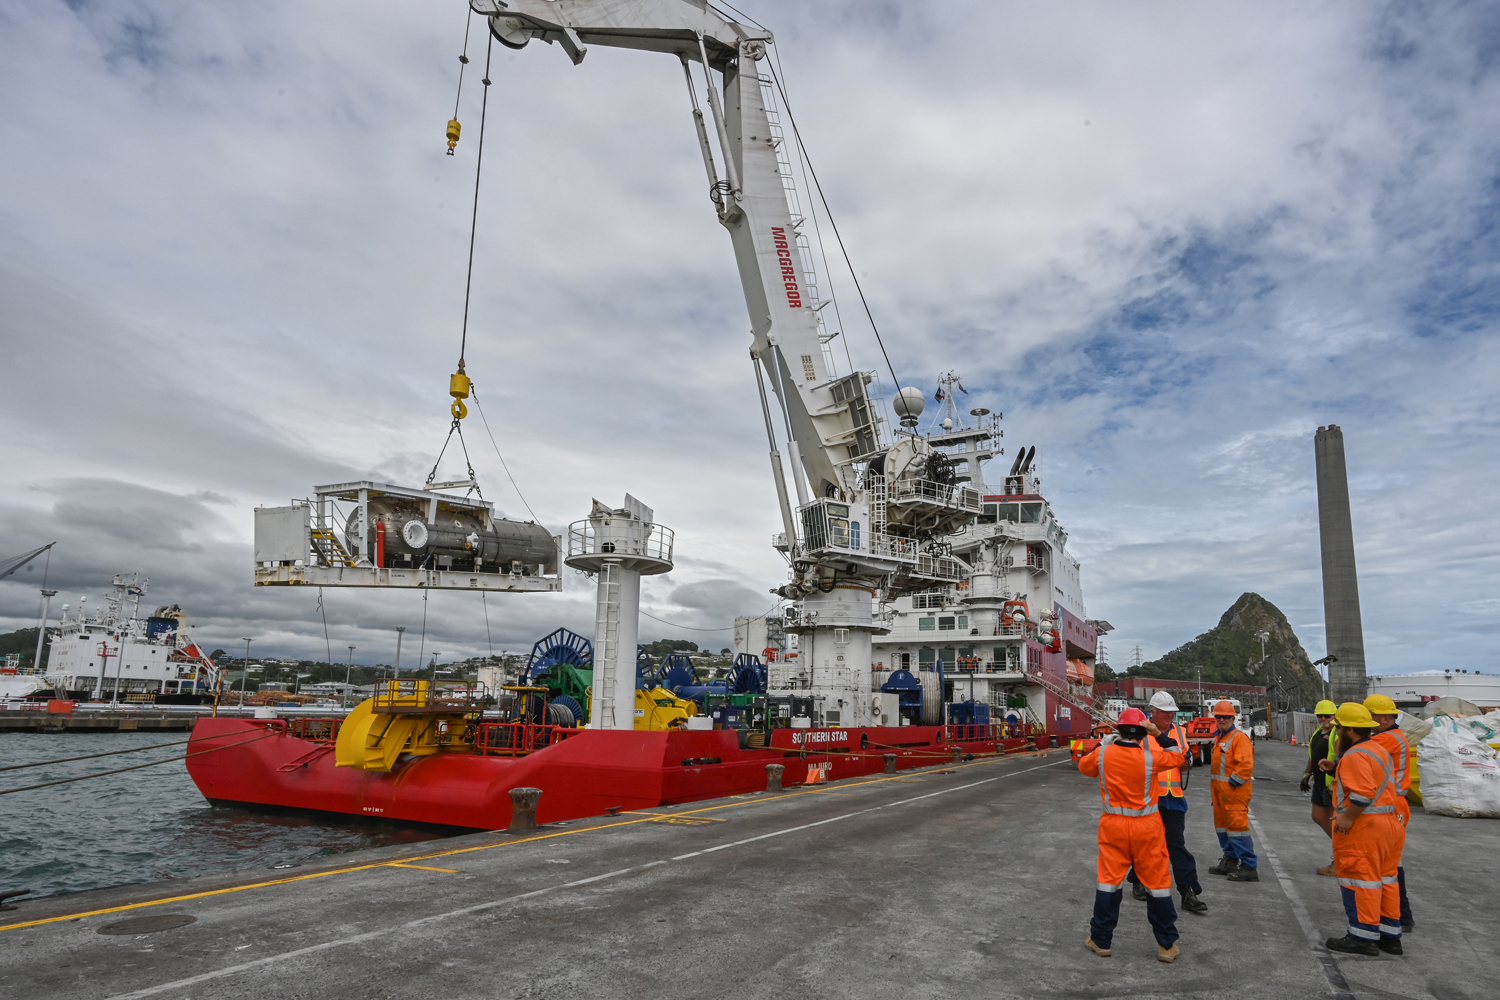 The Southern Star at the Port of Taranaki. 6 people in helmets and orange safety gear stand in the foreground while a hyperbaric reception facility being offloaded via crane in the background.